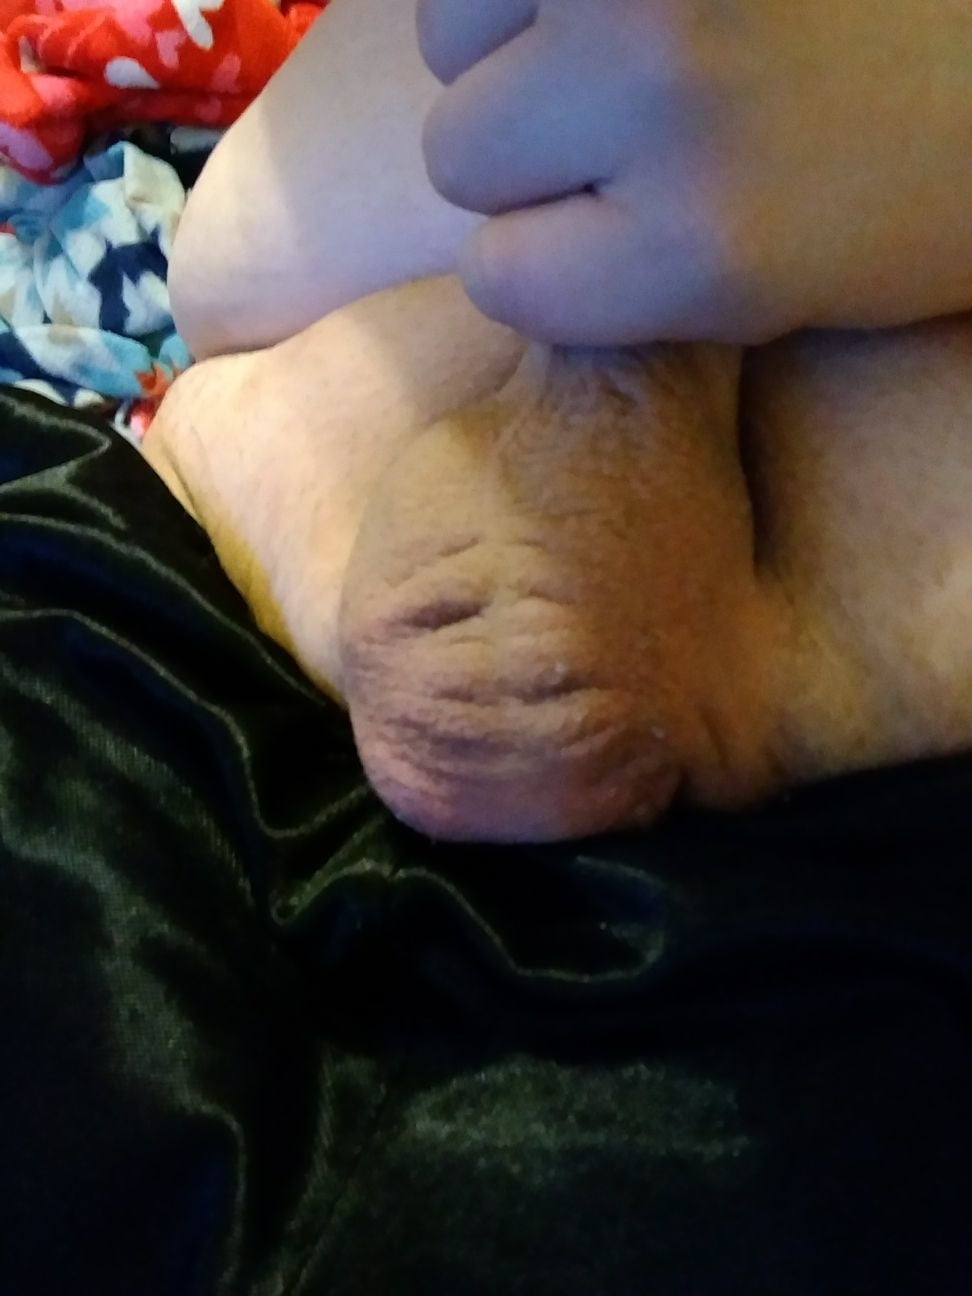 newer pics of my penis or balls #106874547